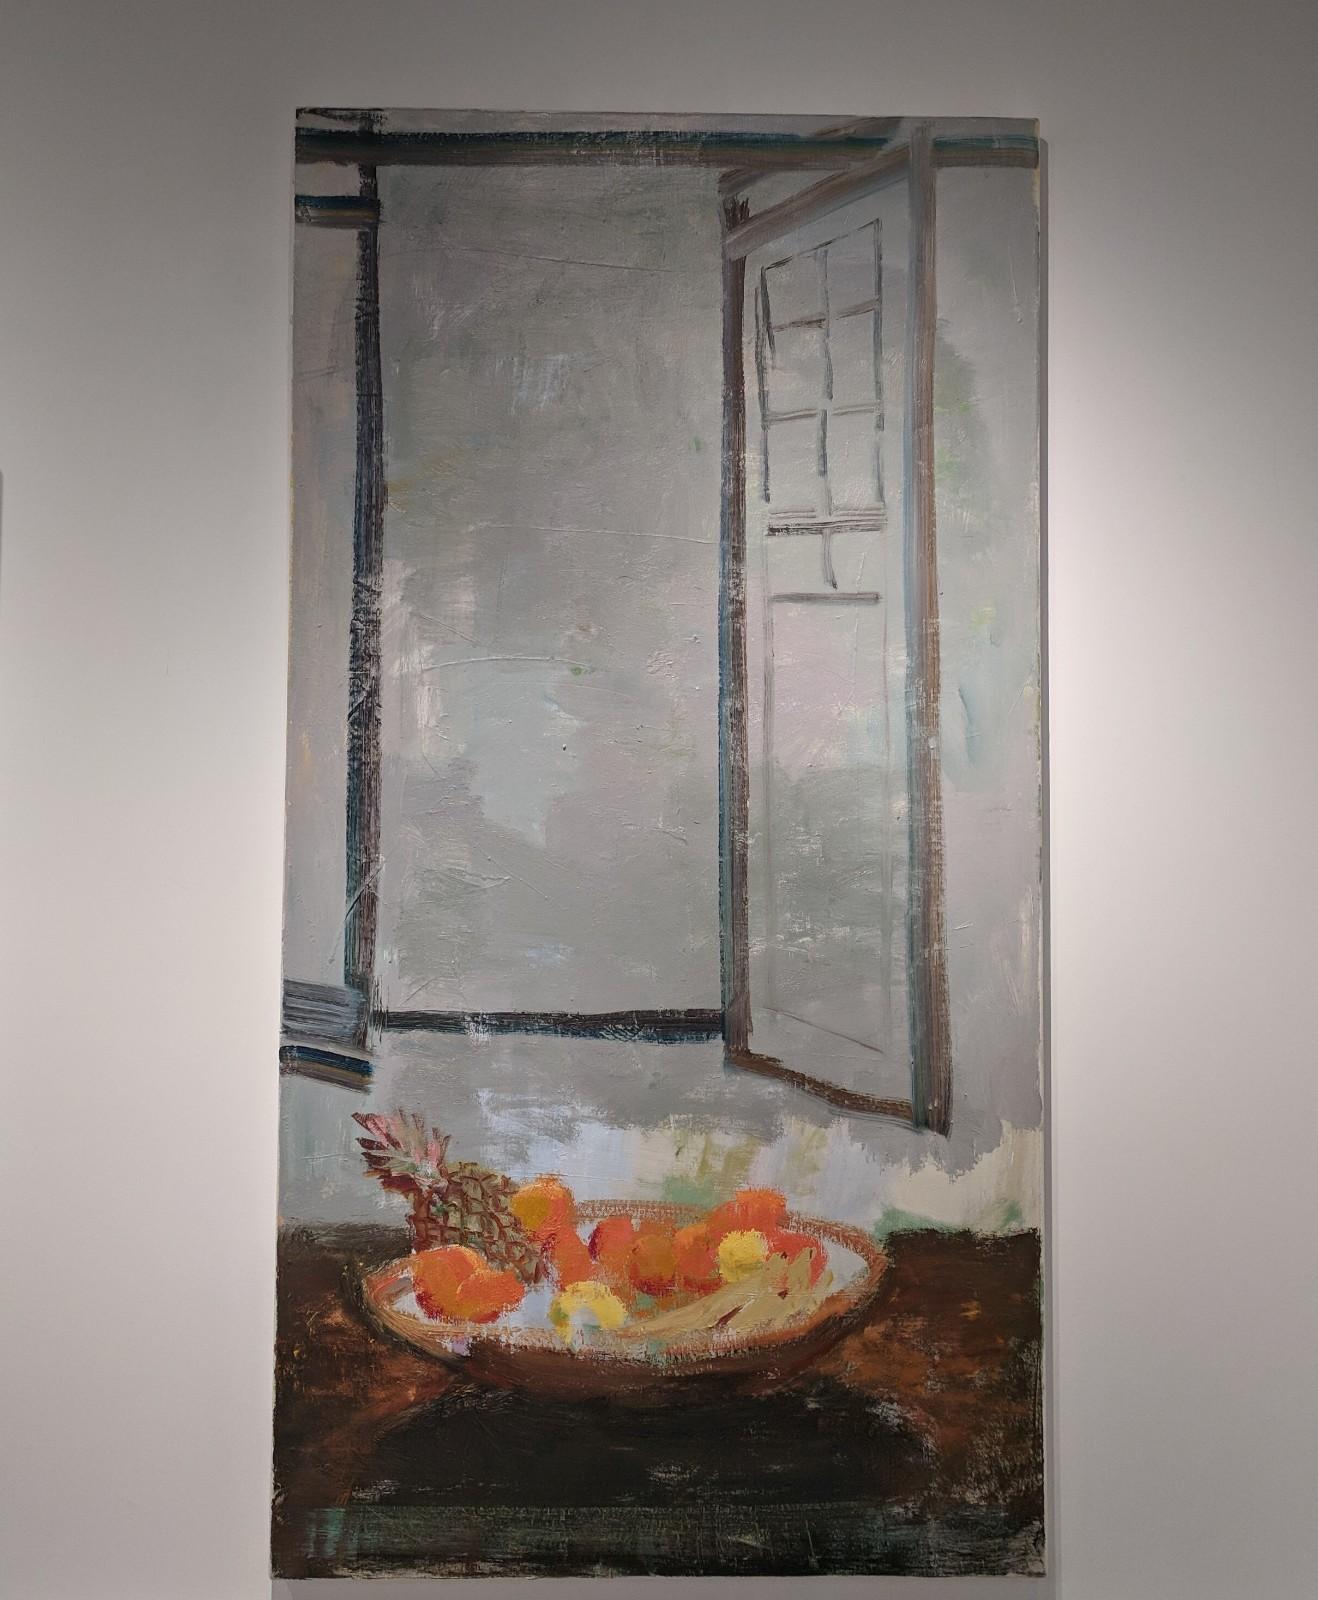 Rustic Window, Fruit Still Life, Interior in Gray, Brown, Yellow, Orange - Painting by Melanie Parke